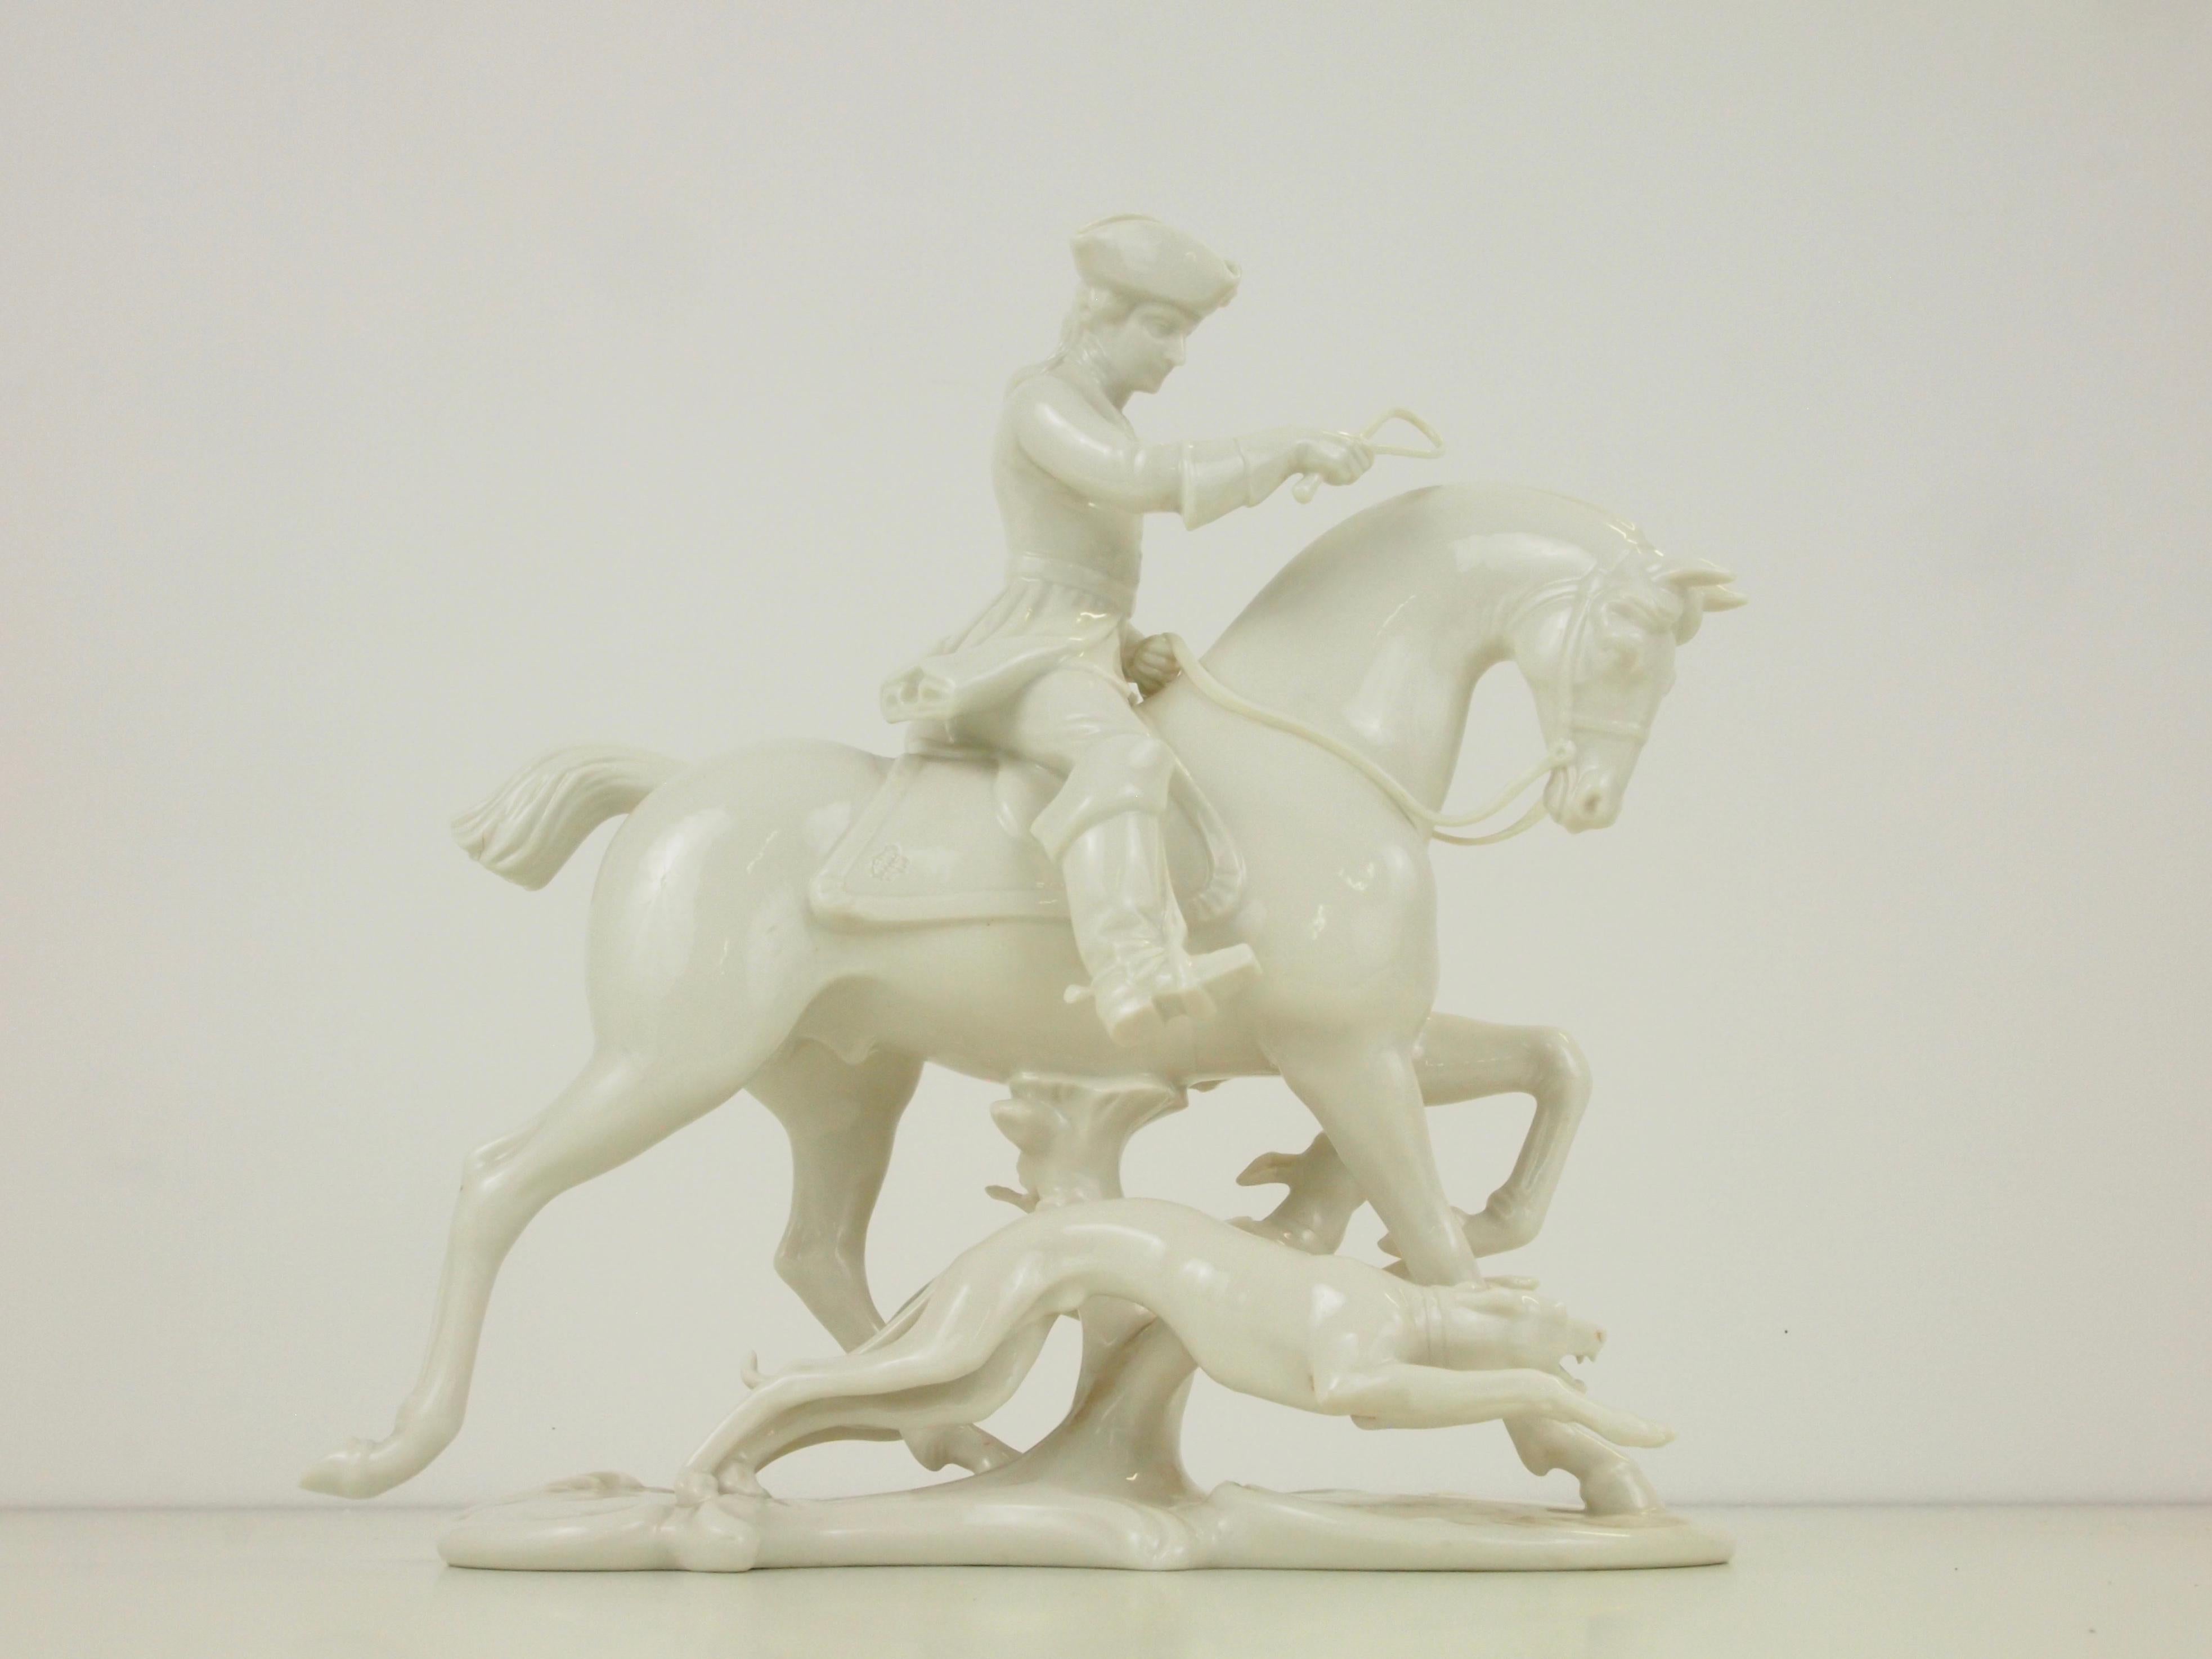 Nymphenburg Porcelain Figurine Depicting a Horse Rider in a Hunting Scene For Sale 4